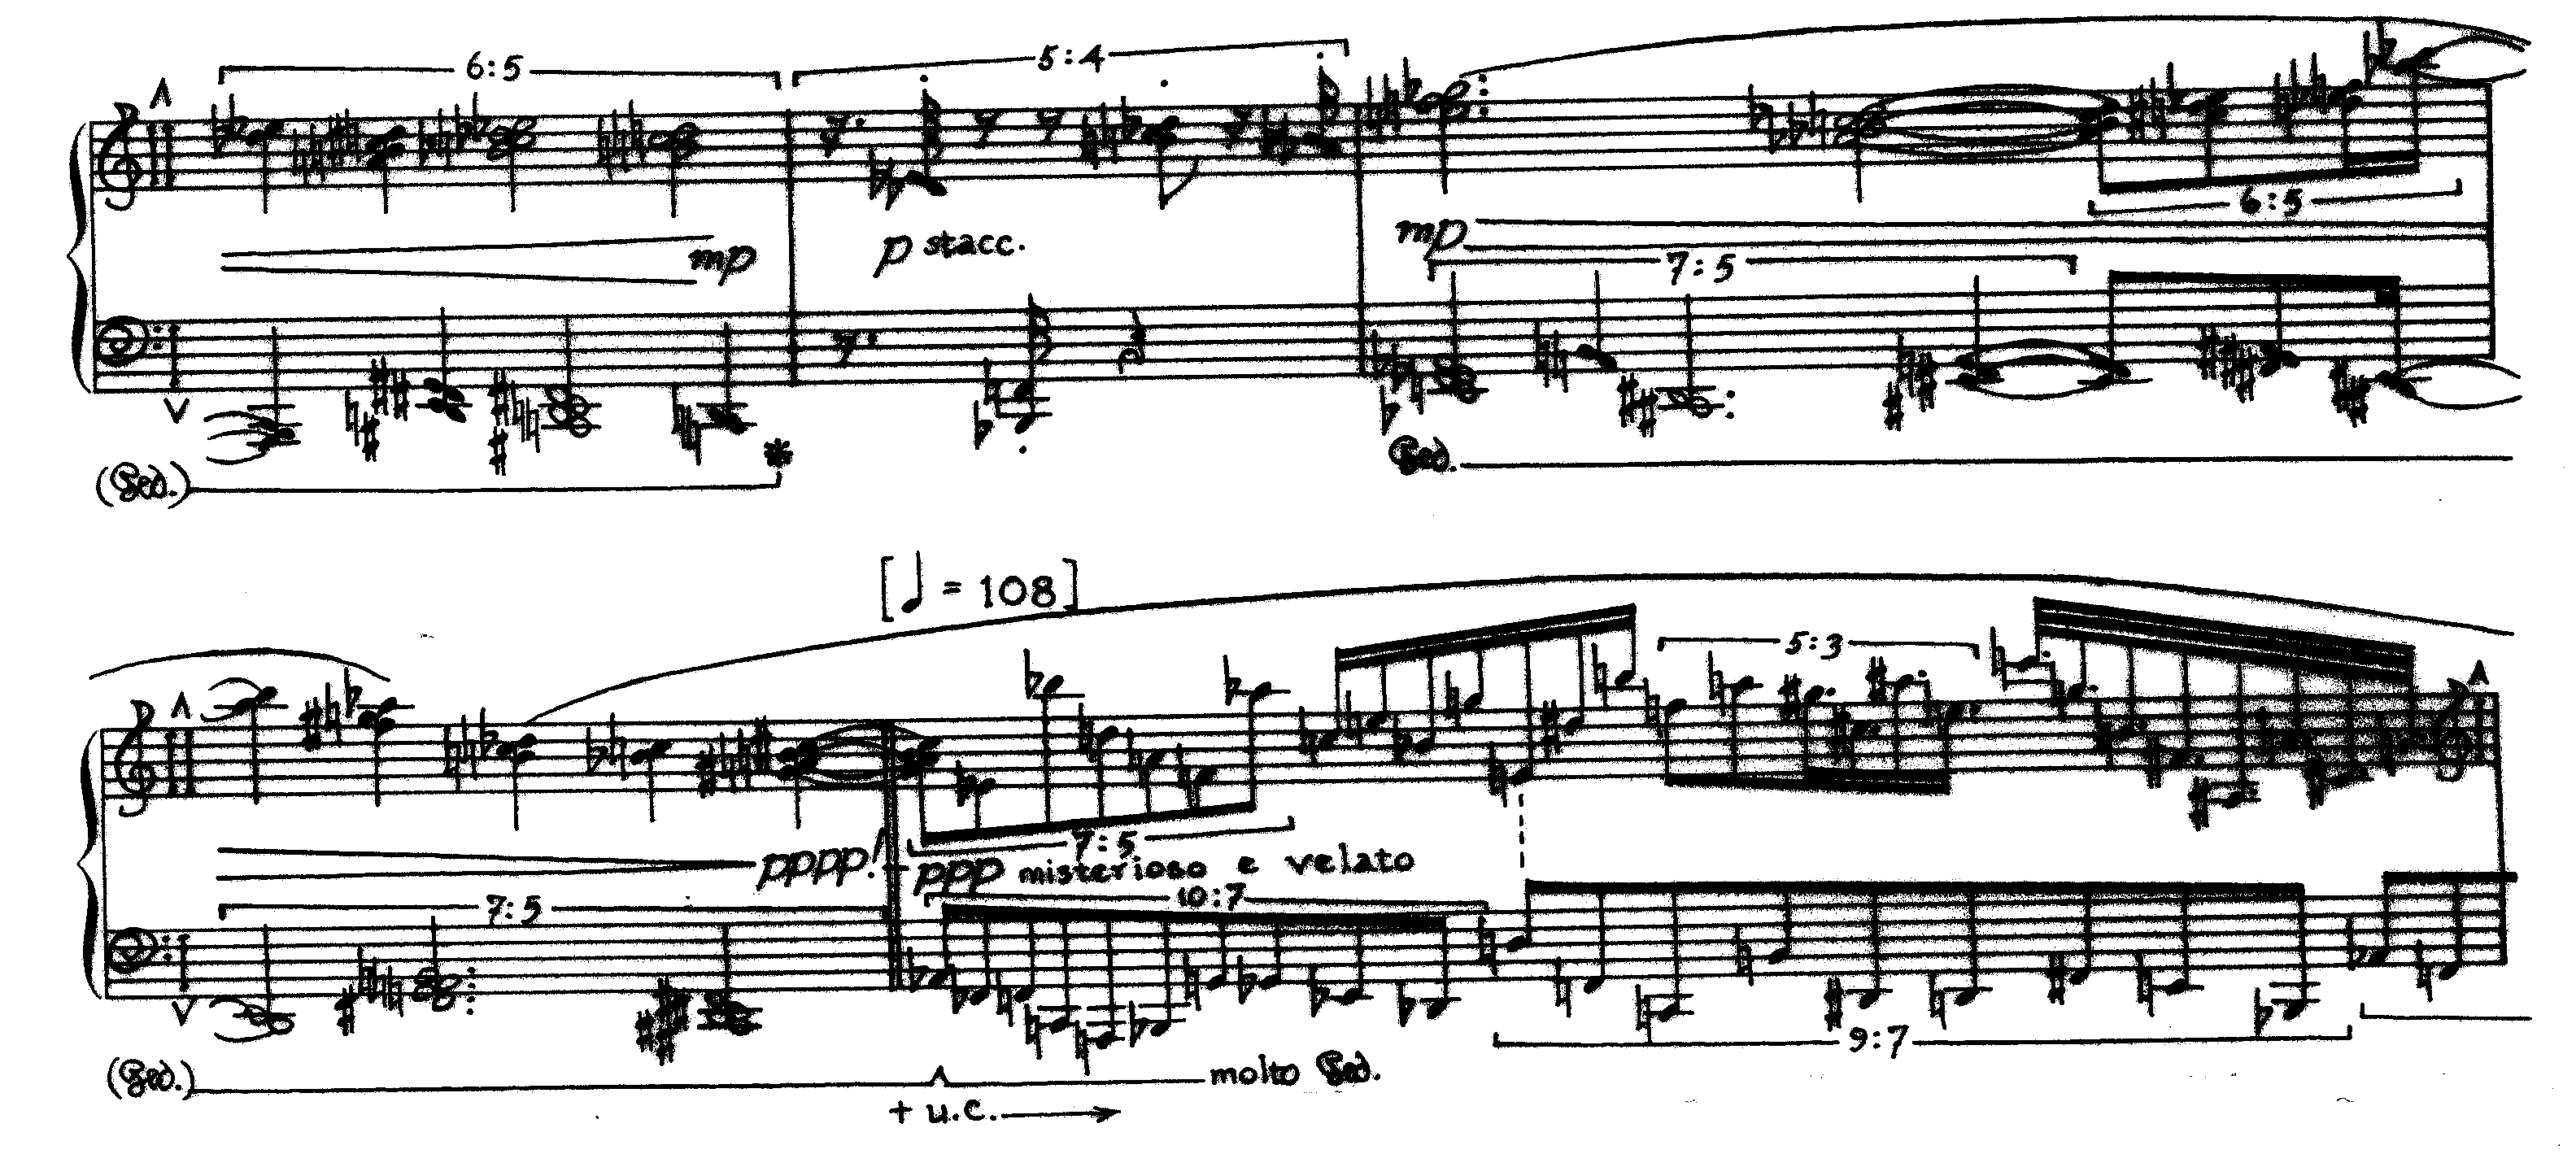 Finnissy - from Piano Concerto No. 6